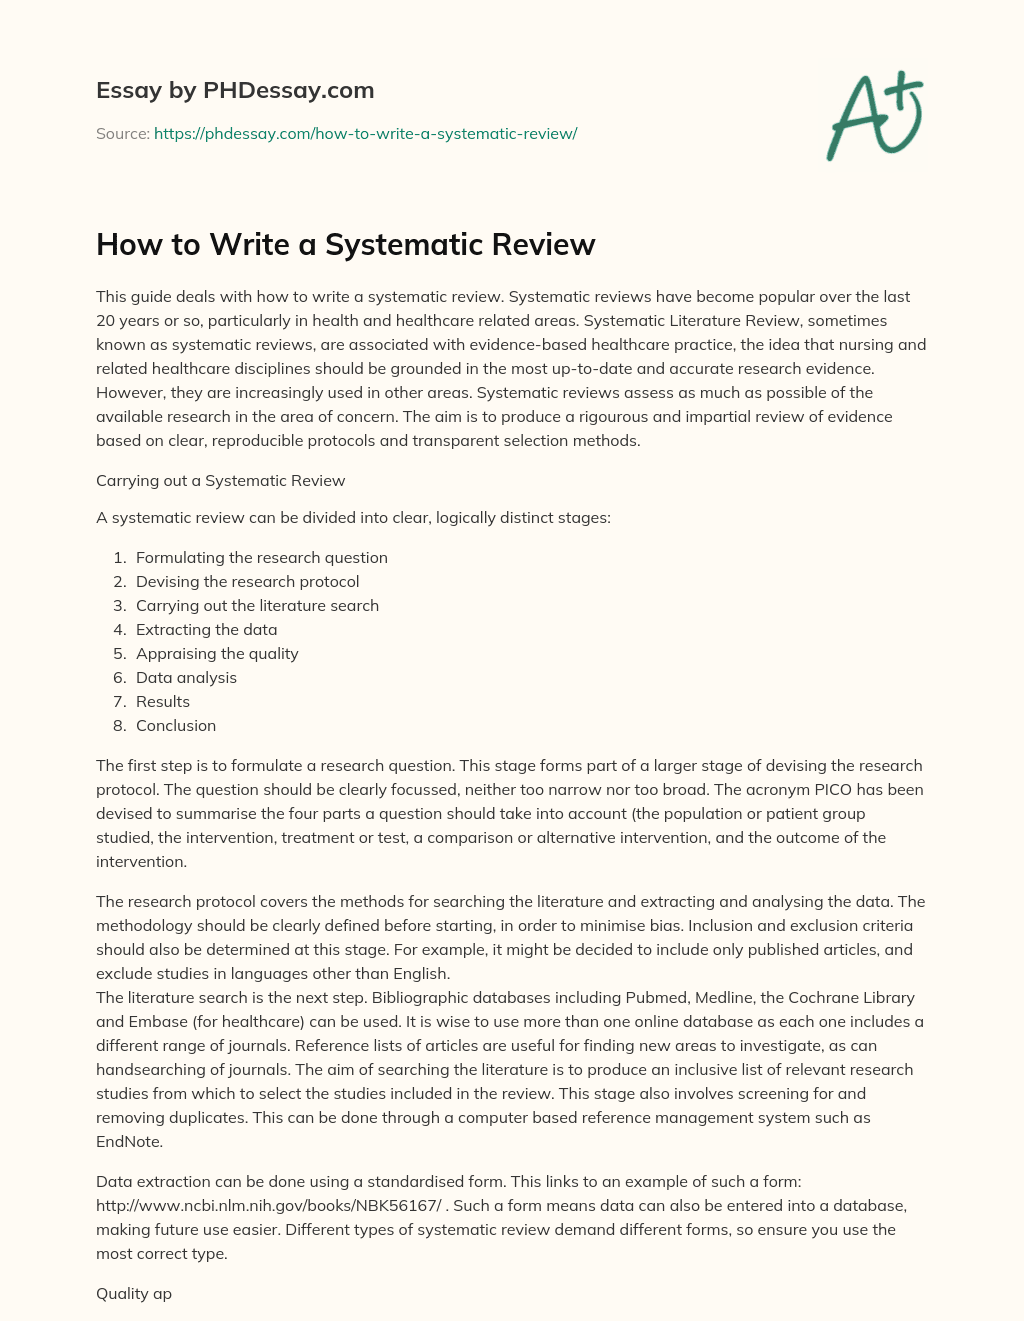 How to Write a Systematic Review essay